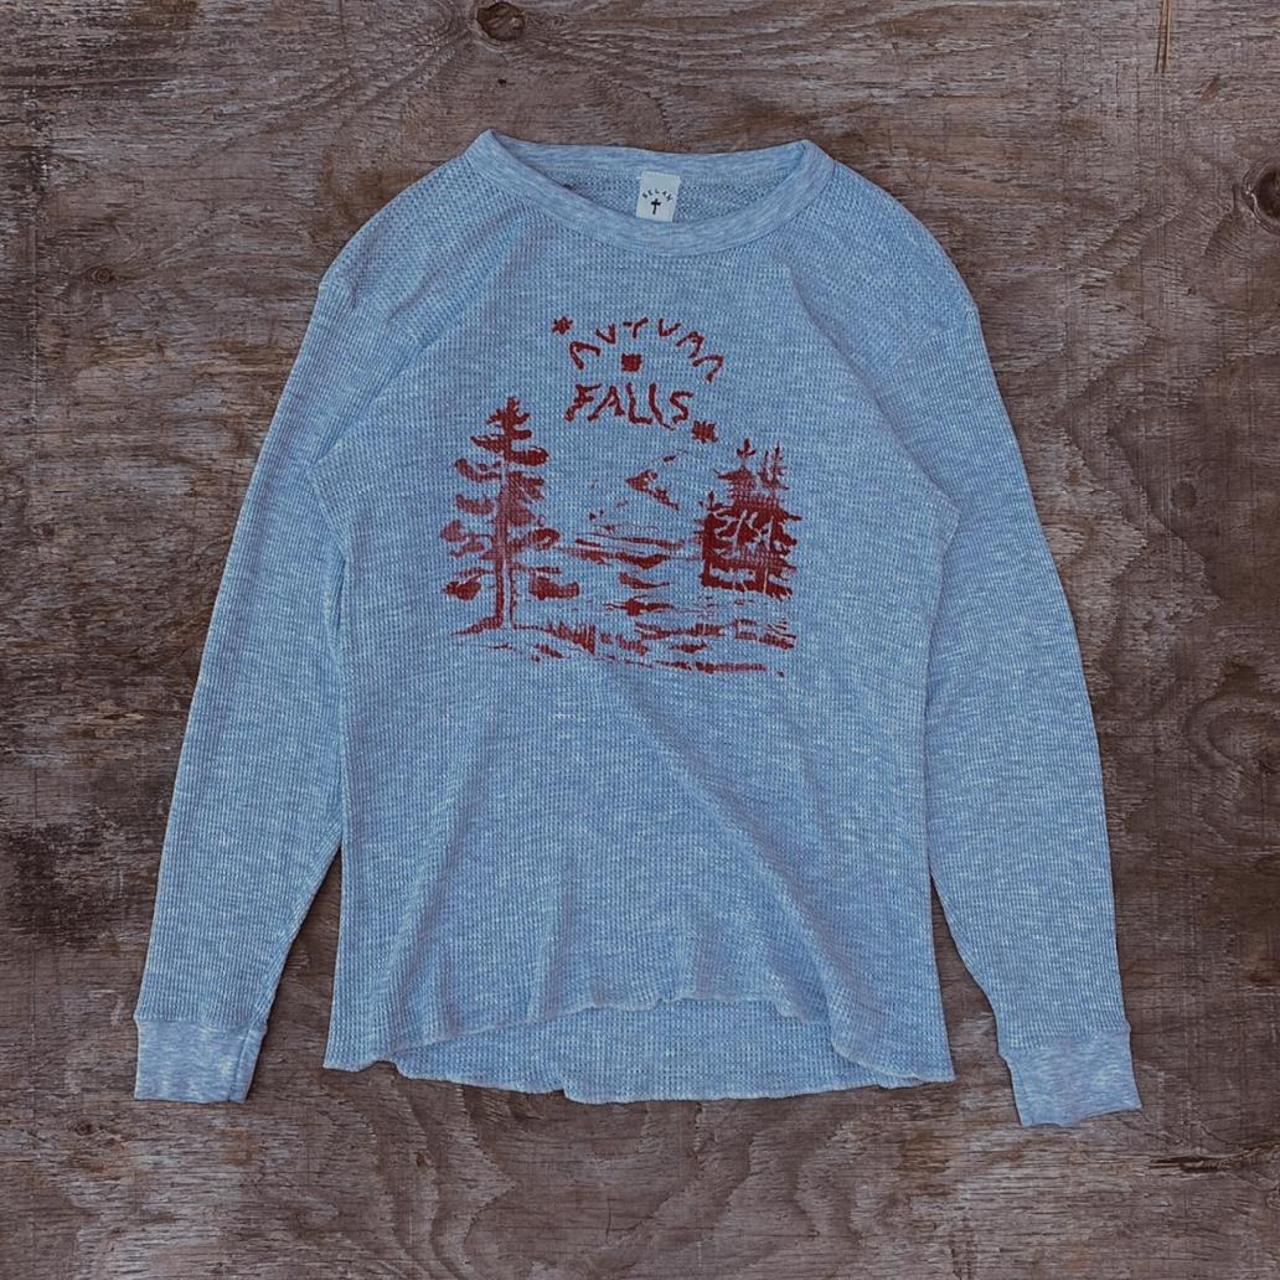 Product Image 1 - Autumn Falls Thermal Shirt

printed by